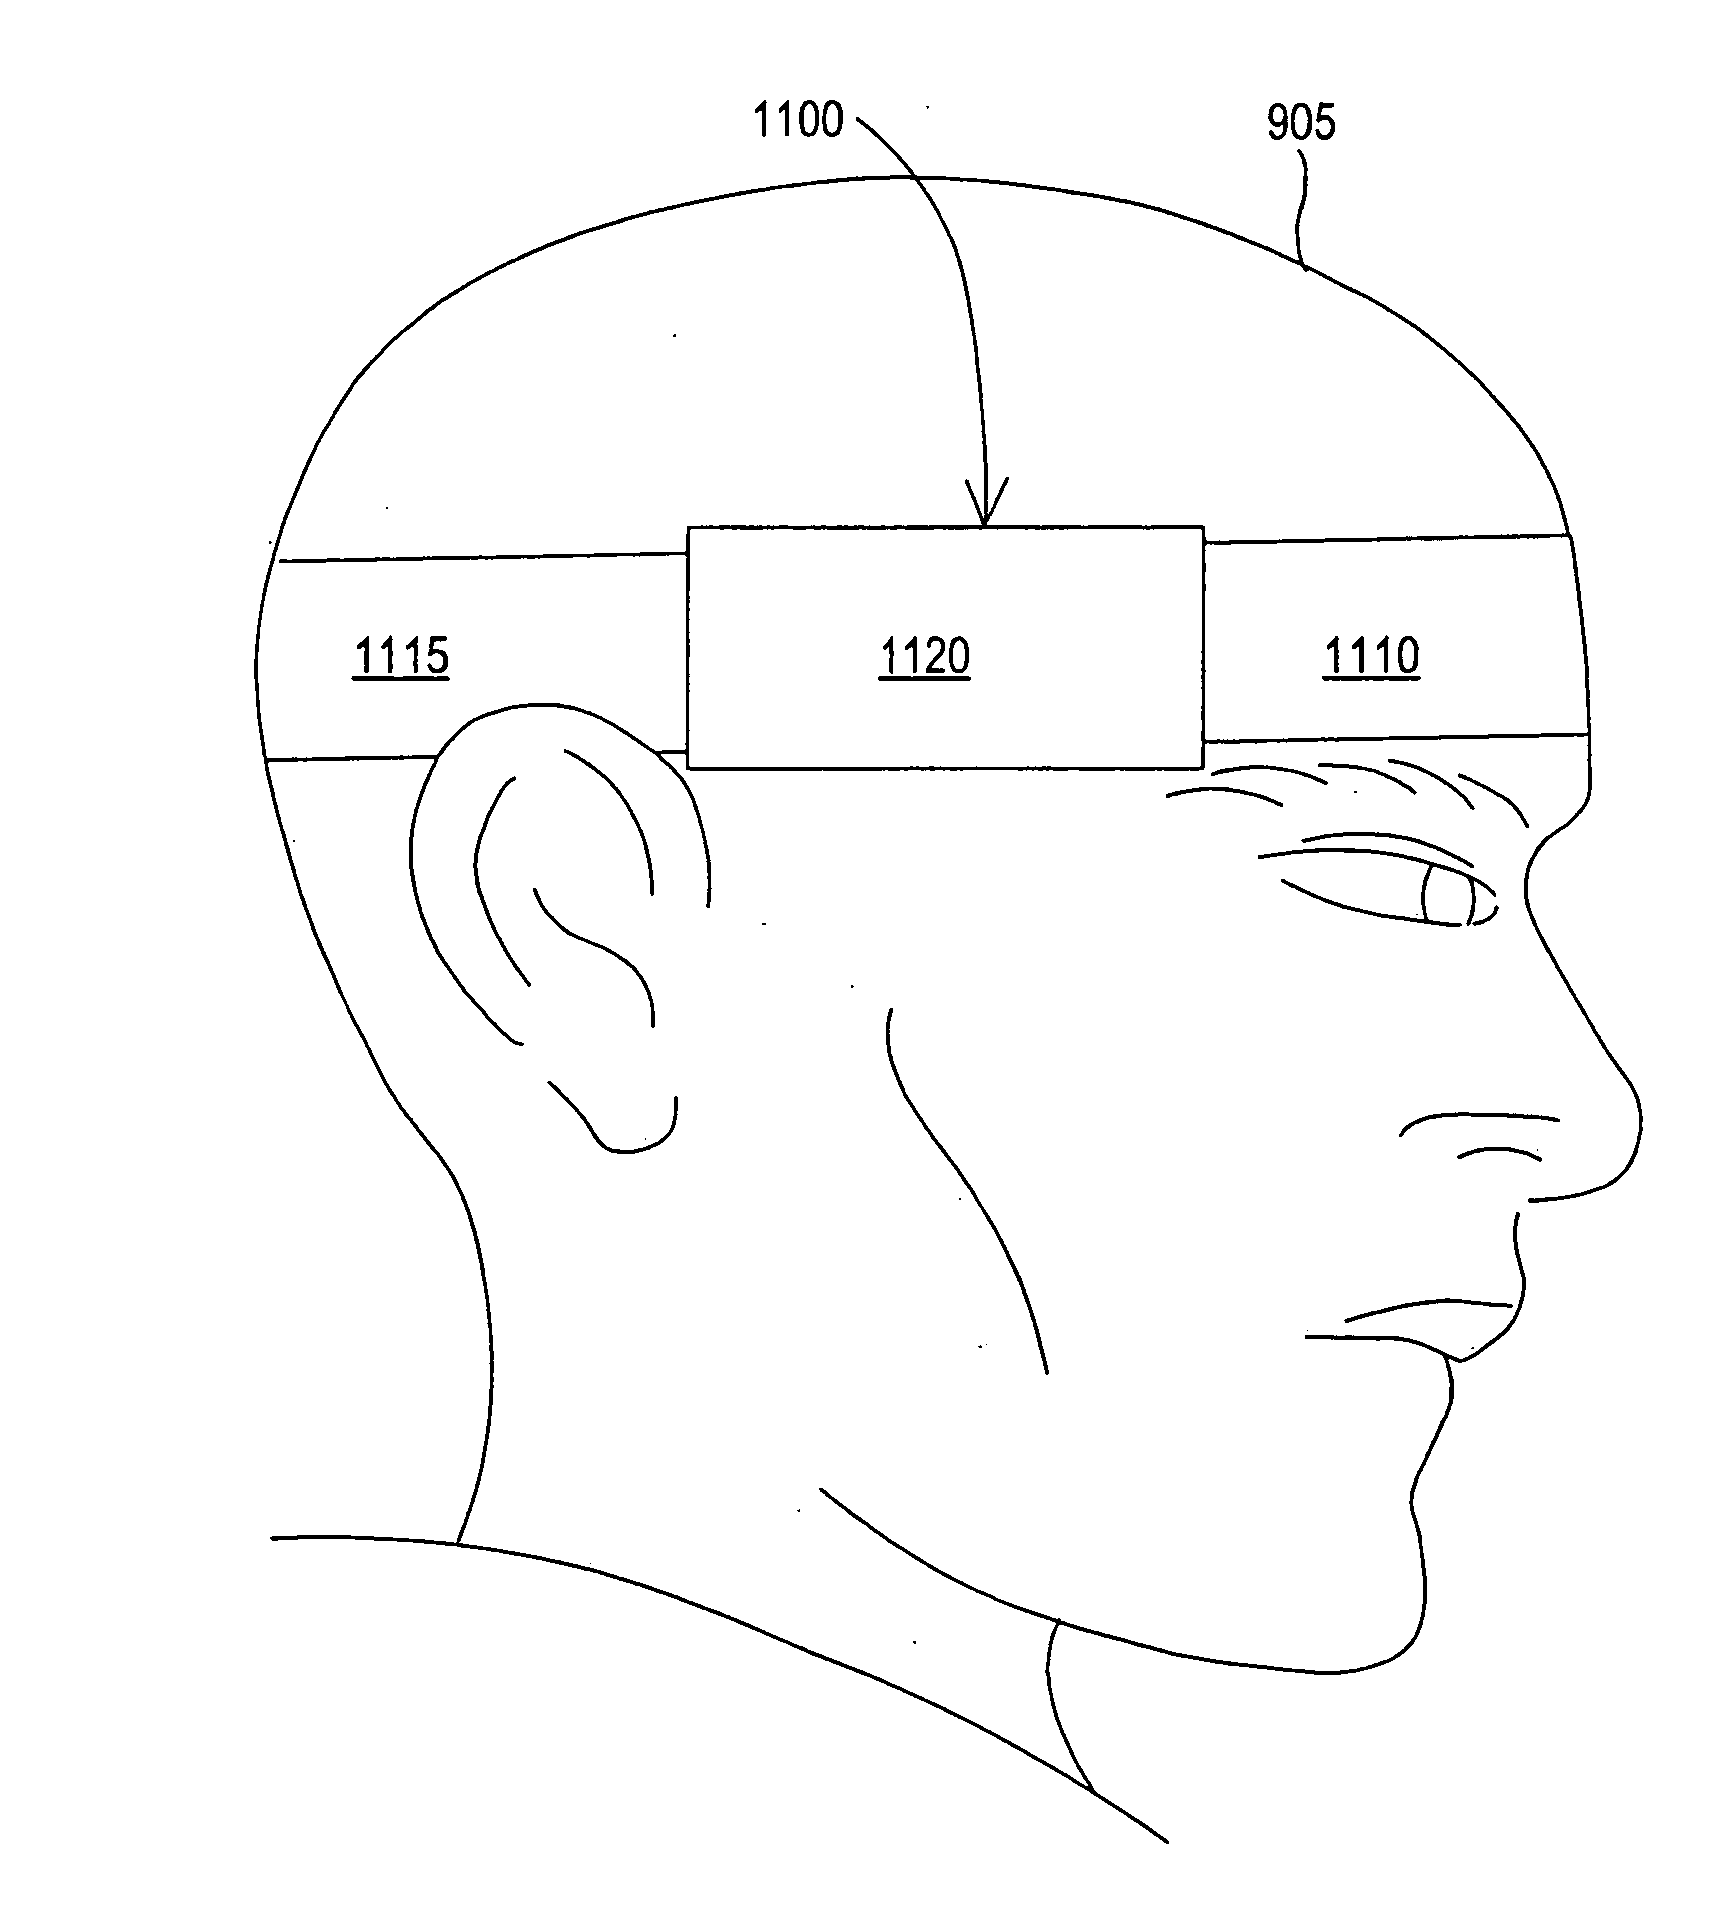 Ultrasound emitting device comprising a head frame